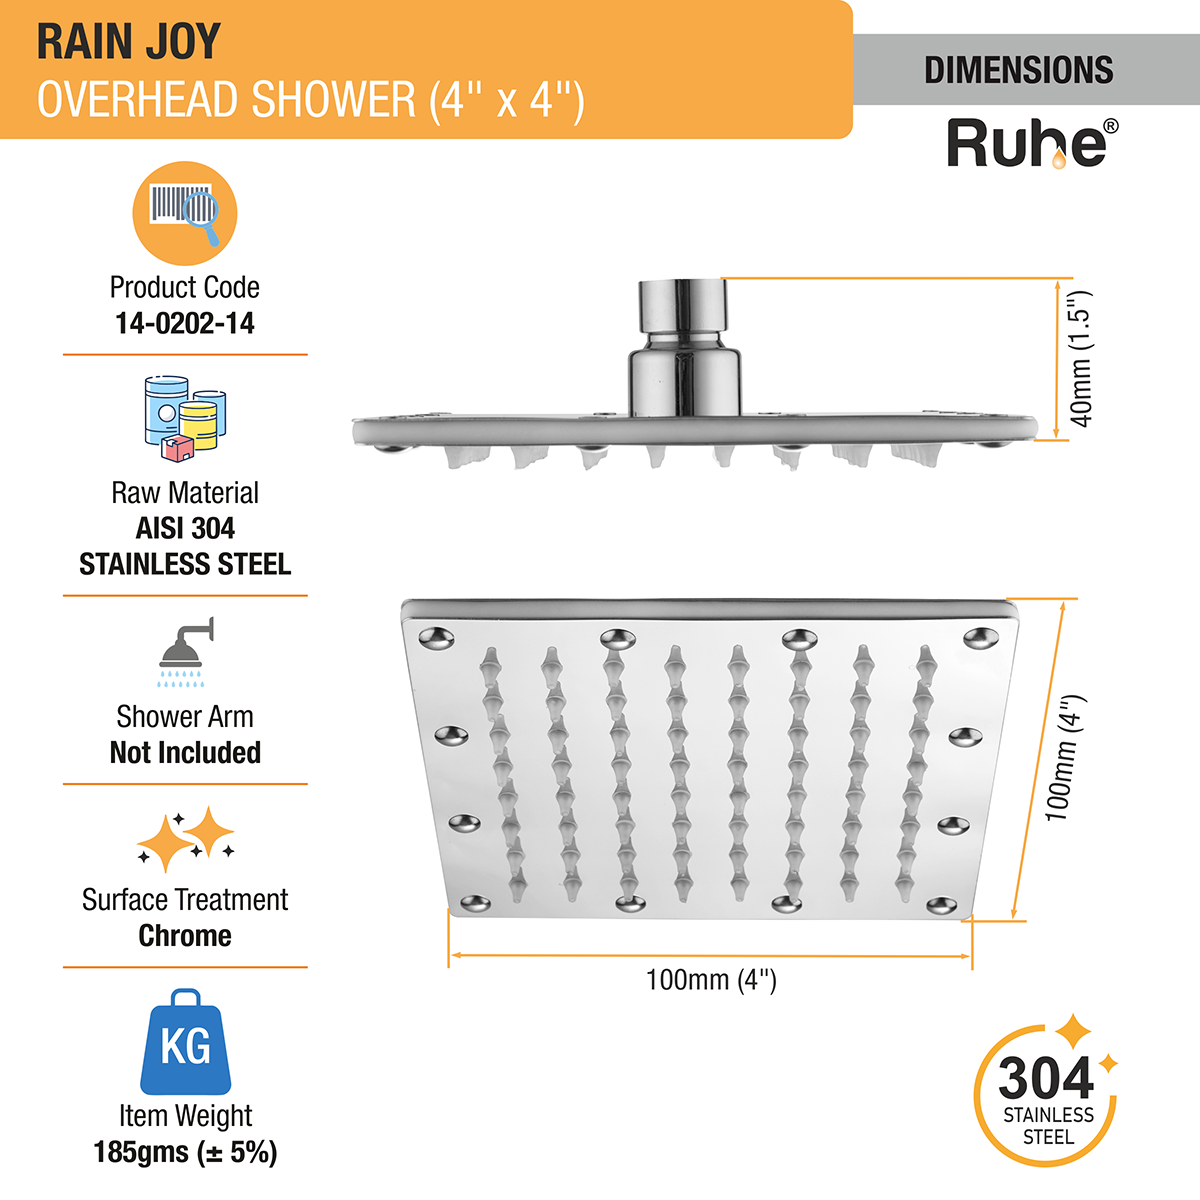 Rain Joy 304-Grade Overhead Shower (4 x 4 Inches) dimensions and sizes